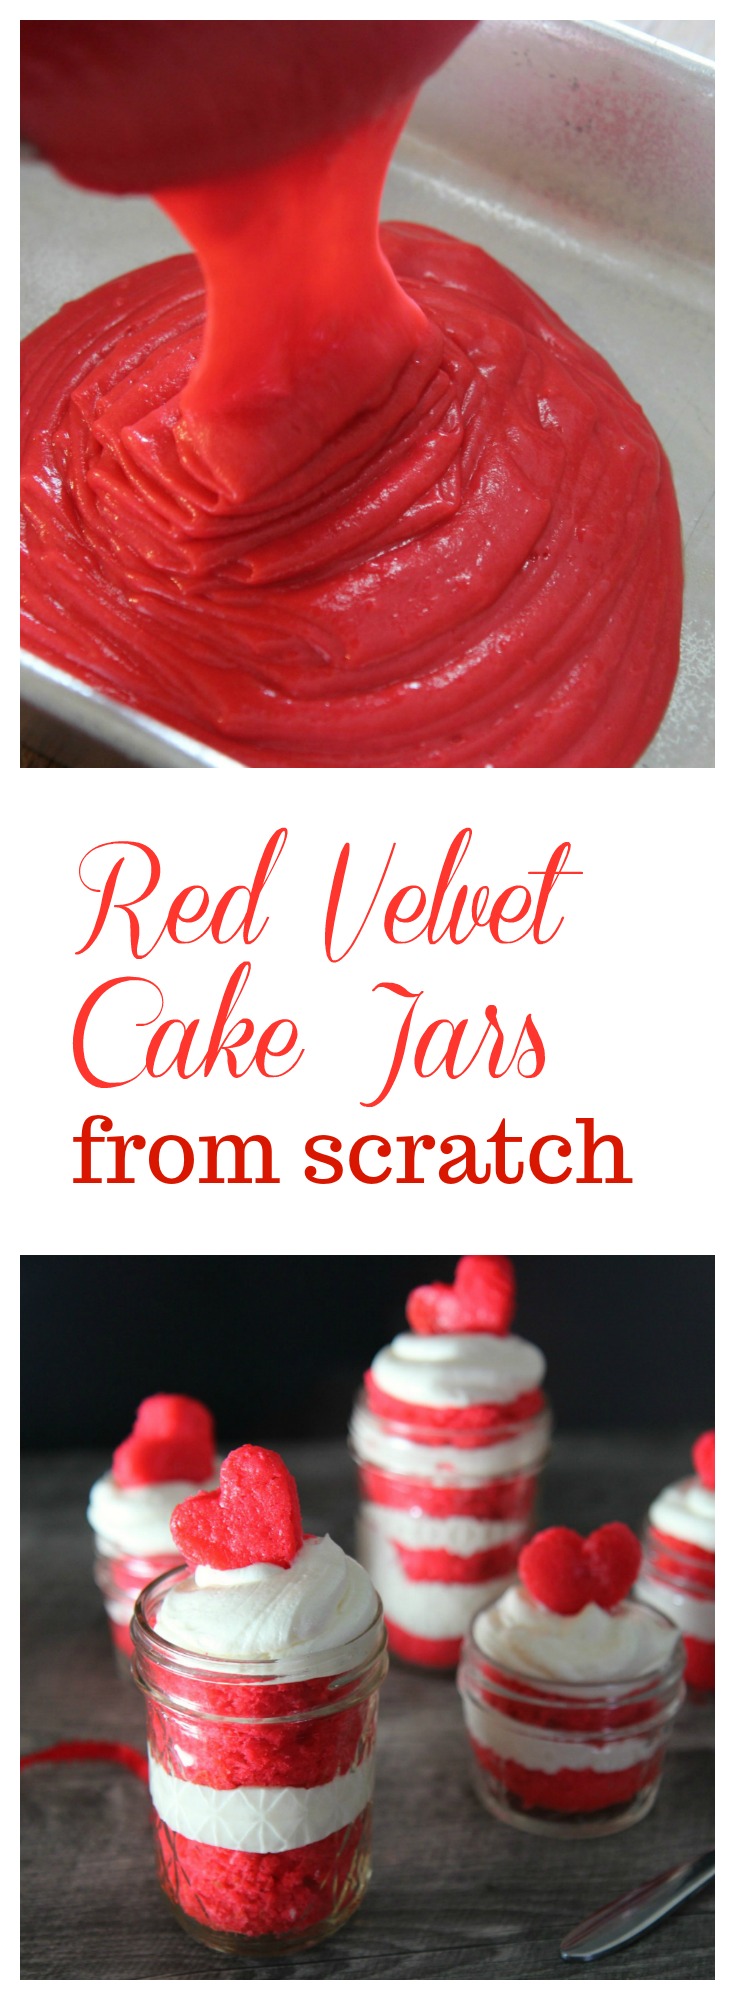 Learn how to make these Red Velvet Cake Jars from scratch at CookedbyJulie.com